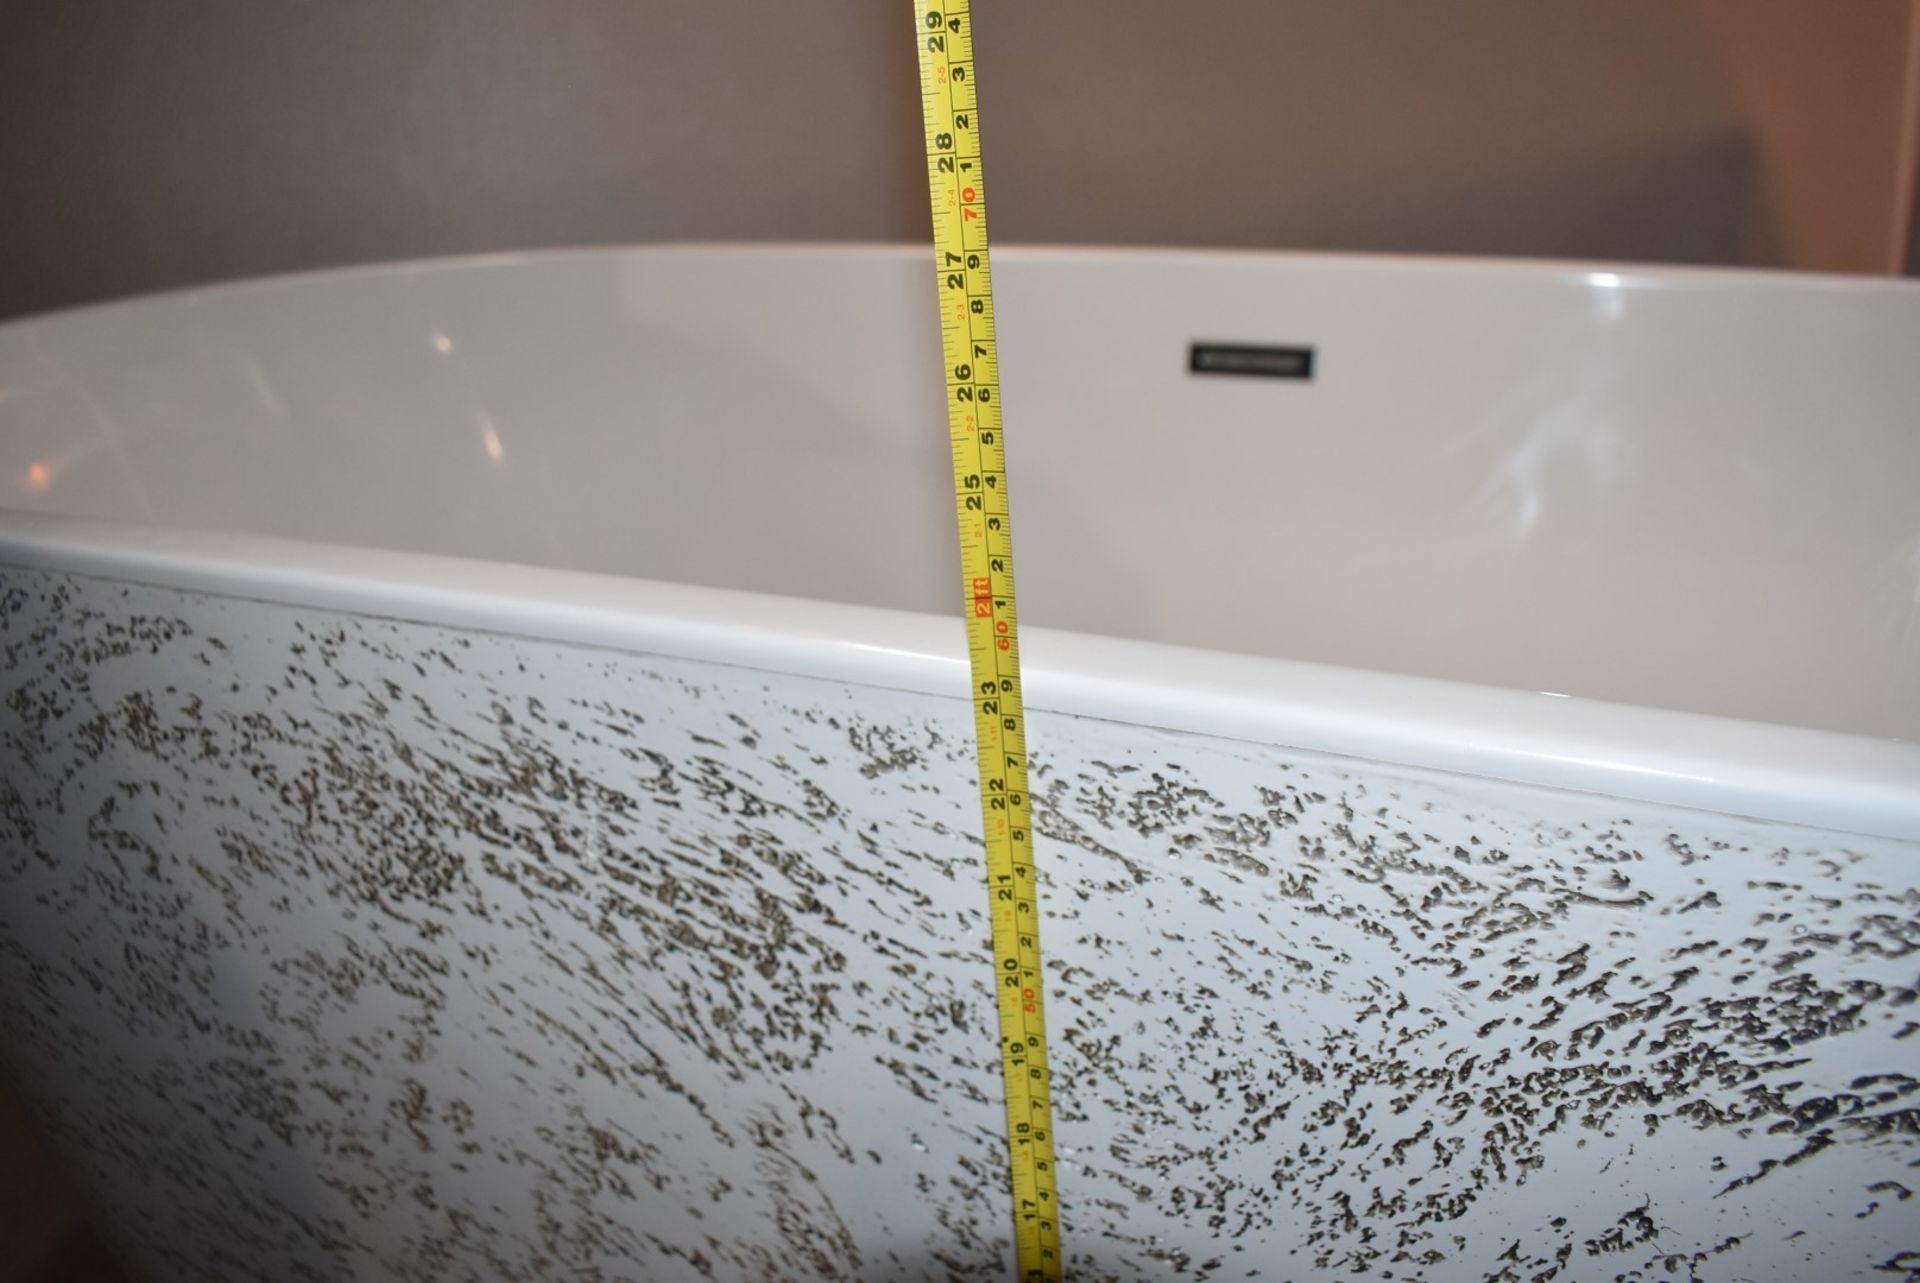 1 x Contemporary Freestanding Bath With a Tactile Textured Surround Panel - 1690mm Wide - New - Image 13 of 15